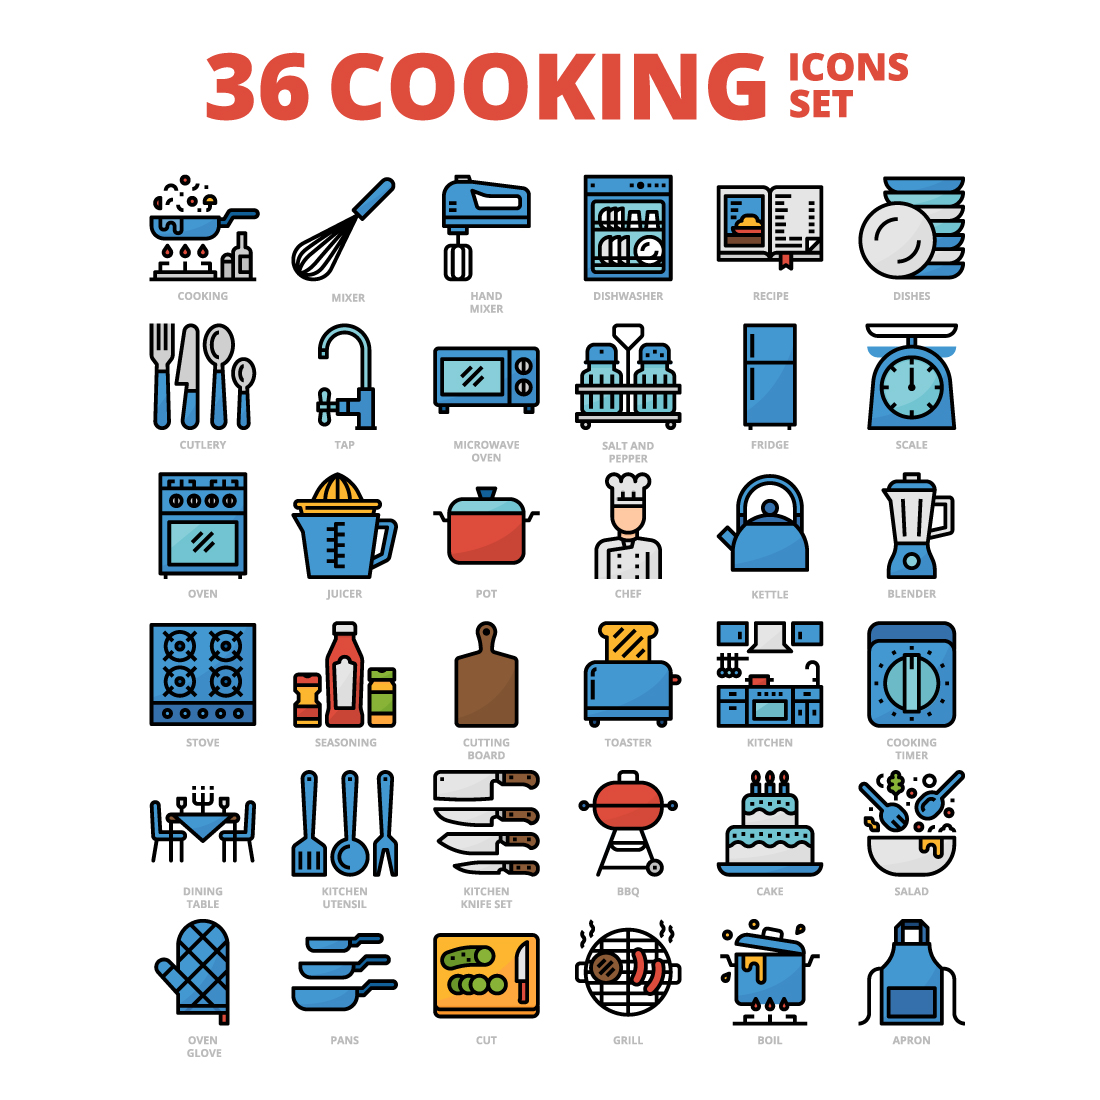 36 Cooking Icons Set x 4 Styles cover image.